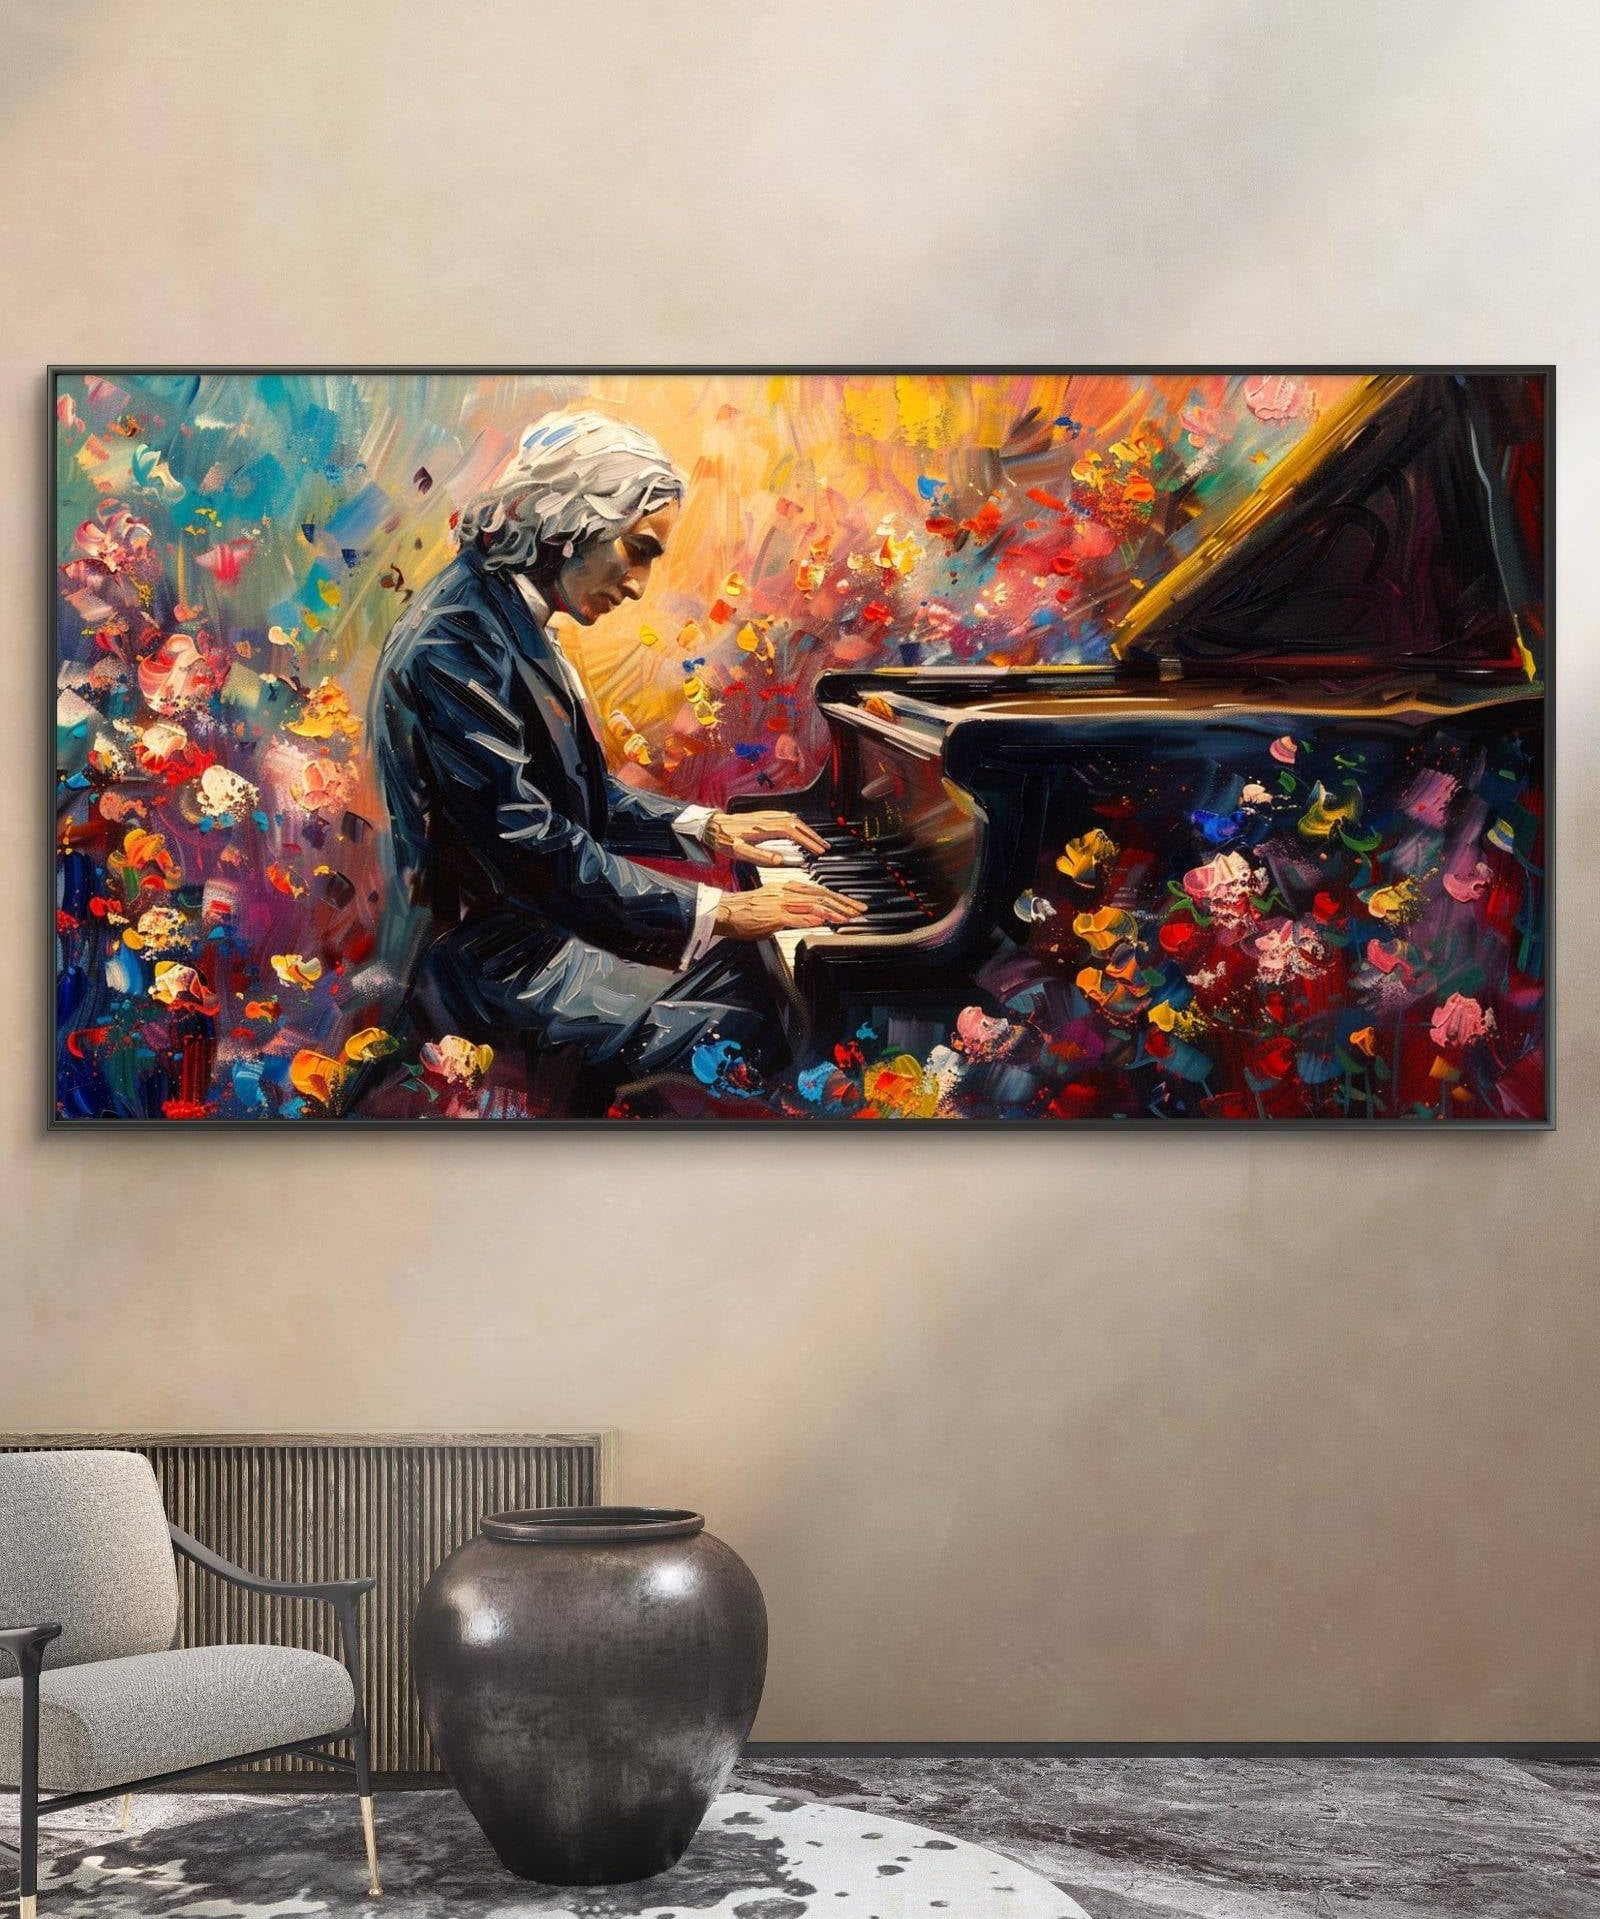 Musician painting